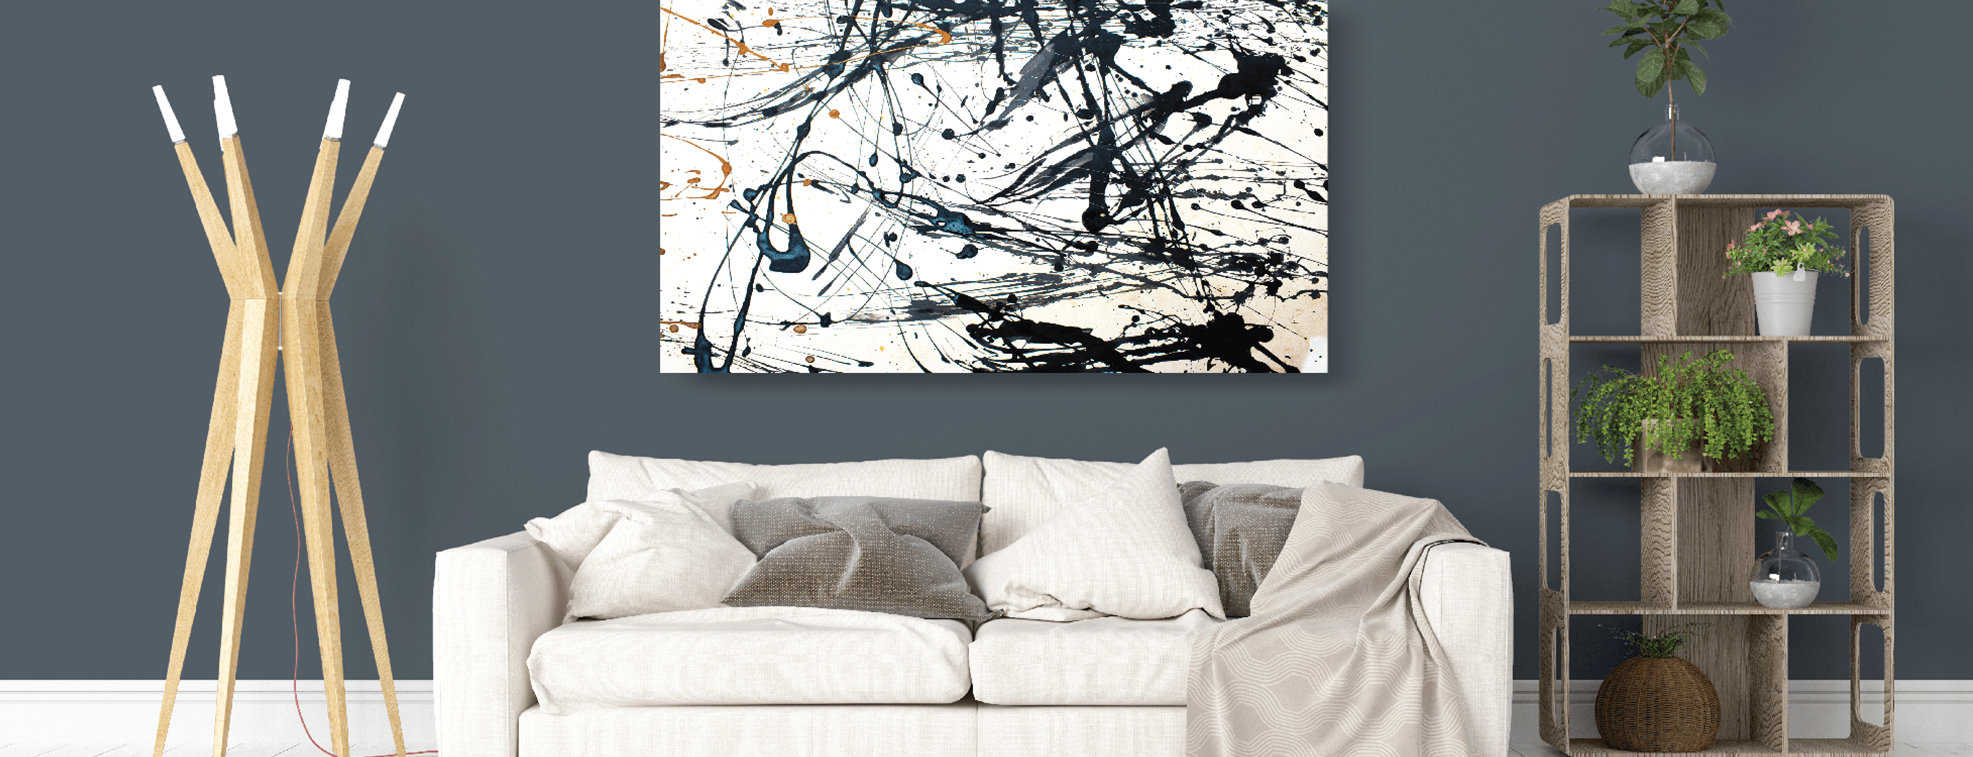 Photo Canvas for Your Interior